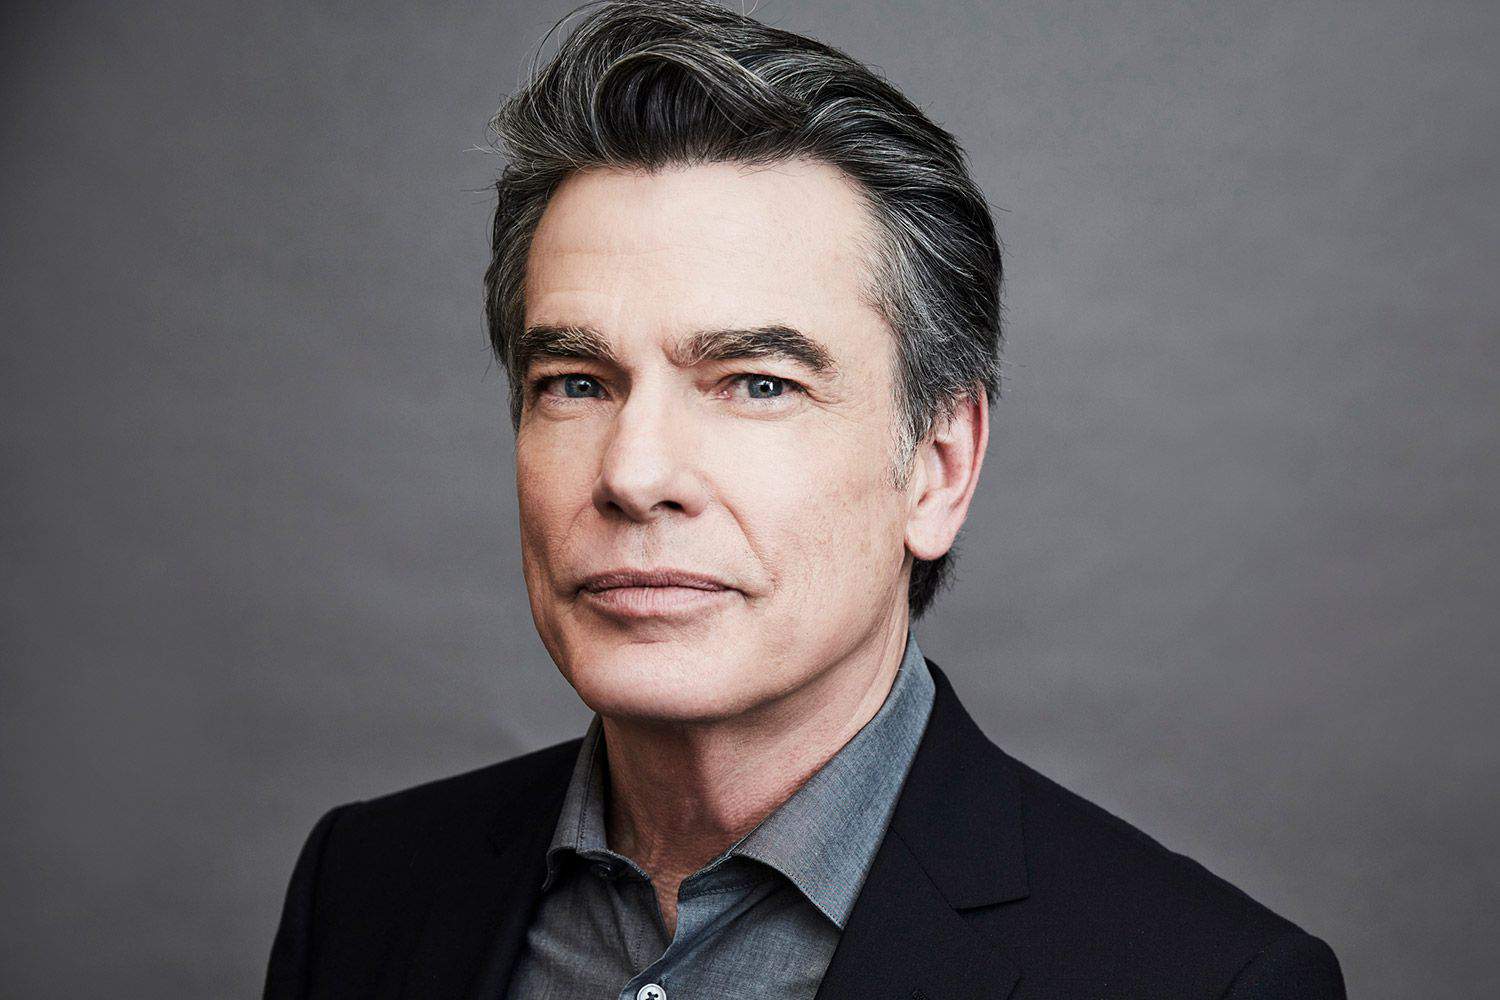 How rich is Peter Gallagher?